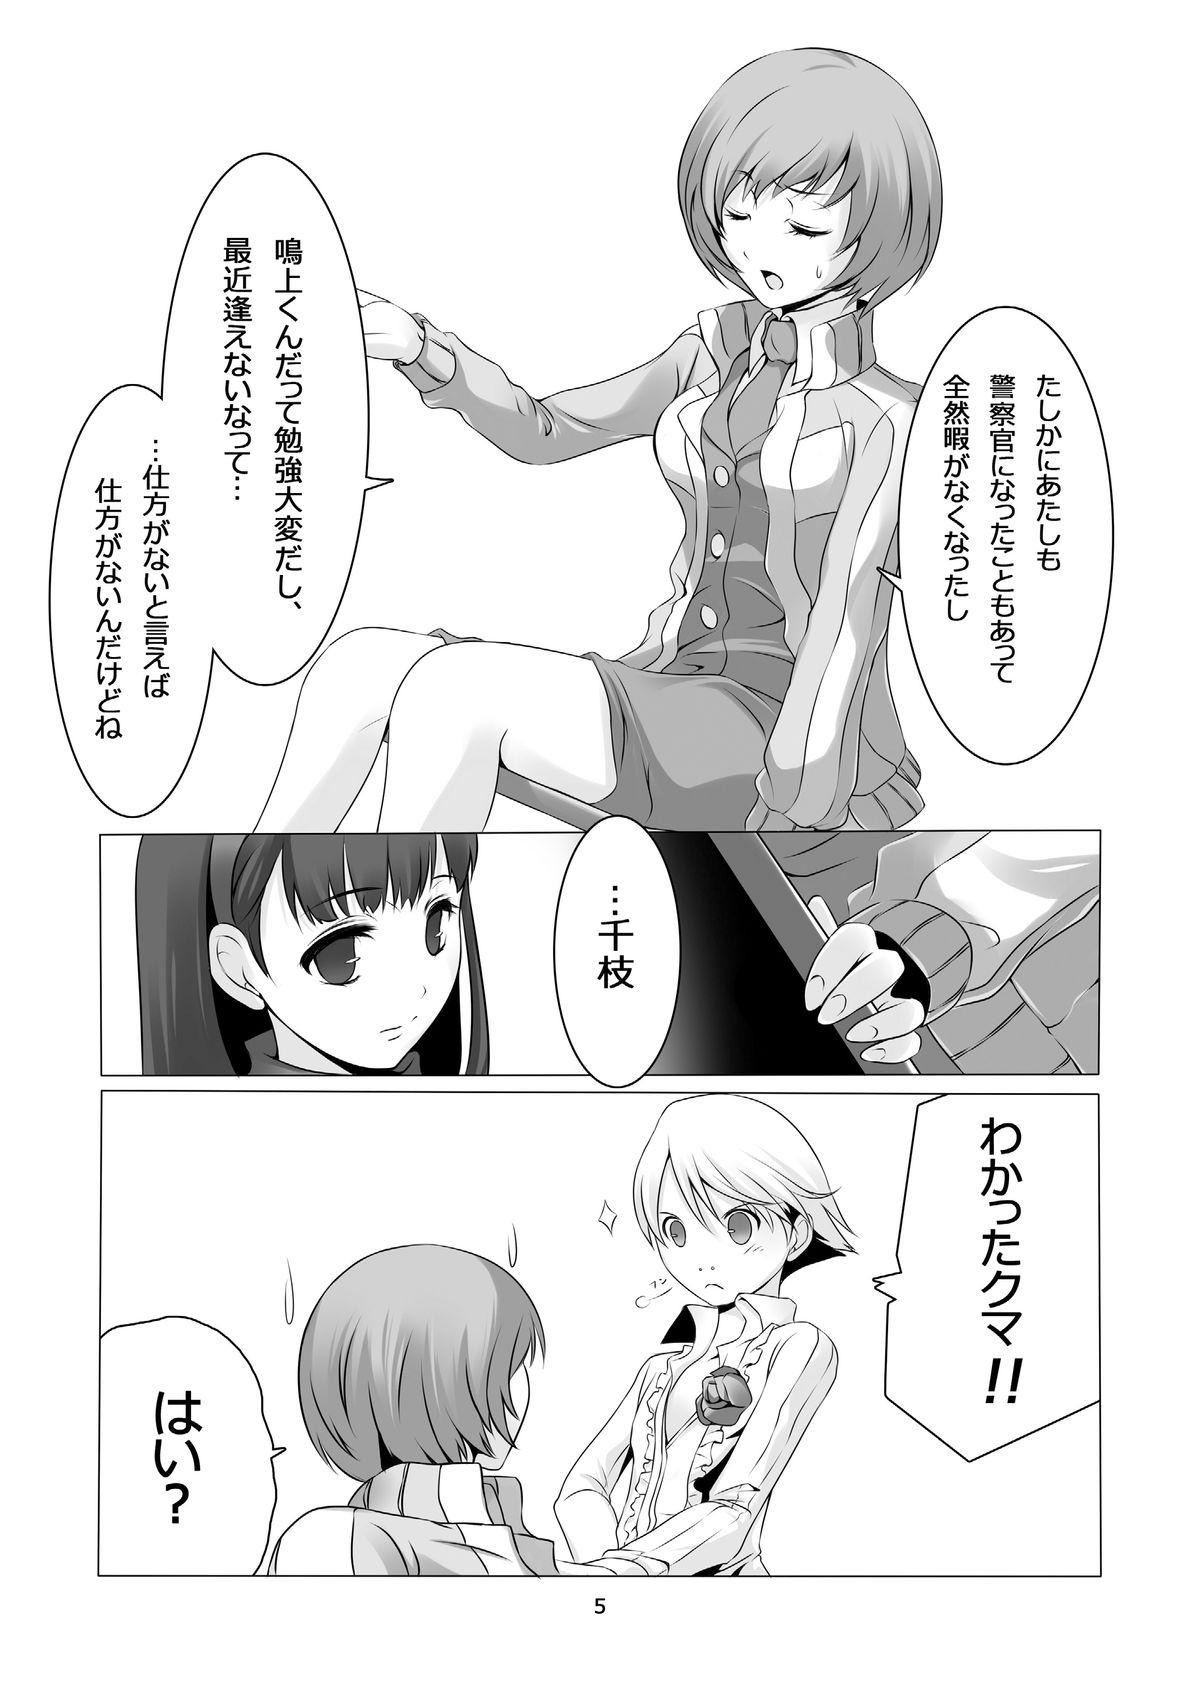 Francaise Persona 4: The Doujin #2 - Persona 4 Cheating - Page 7